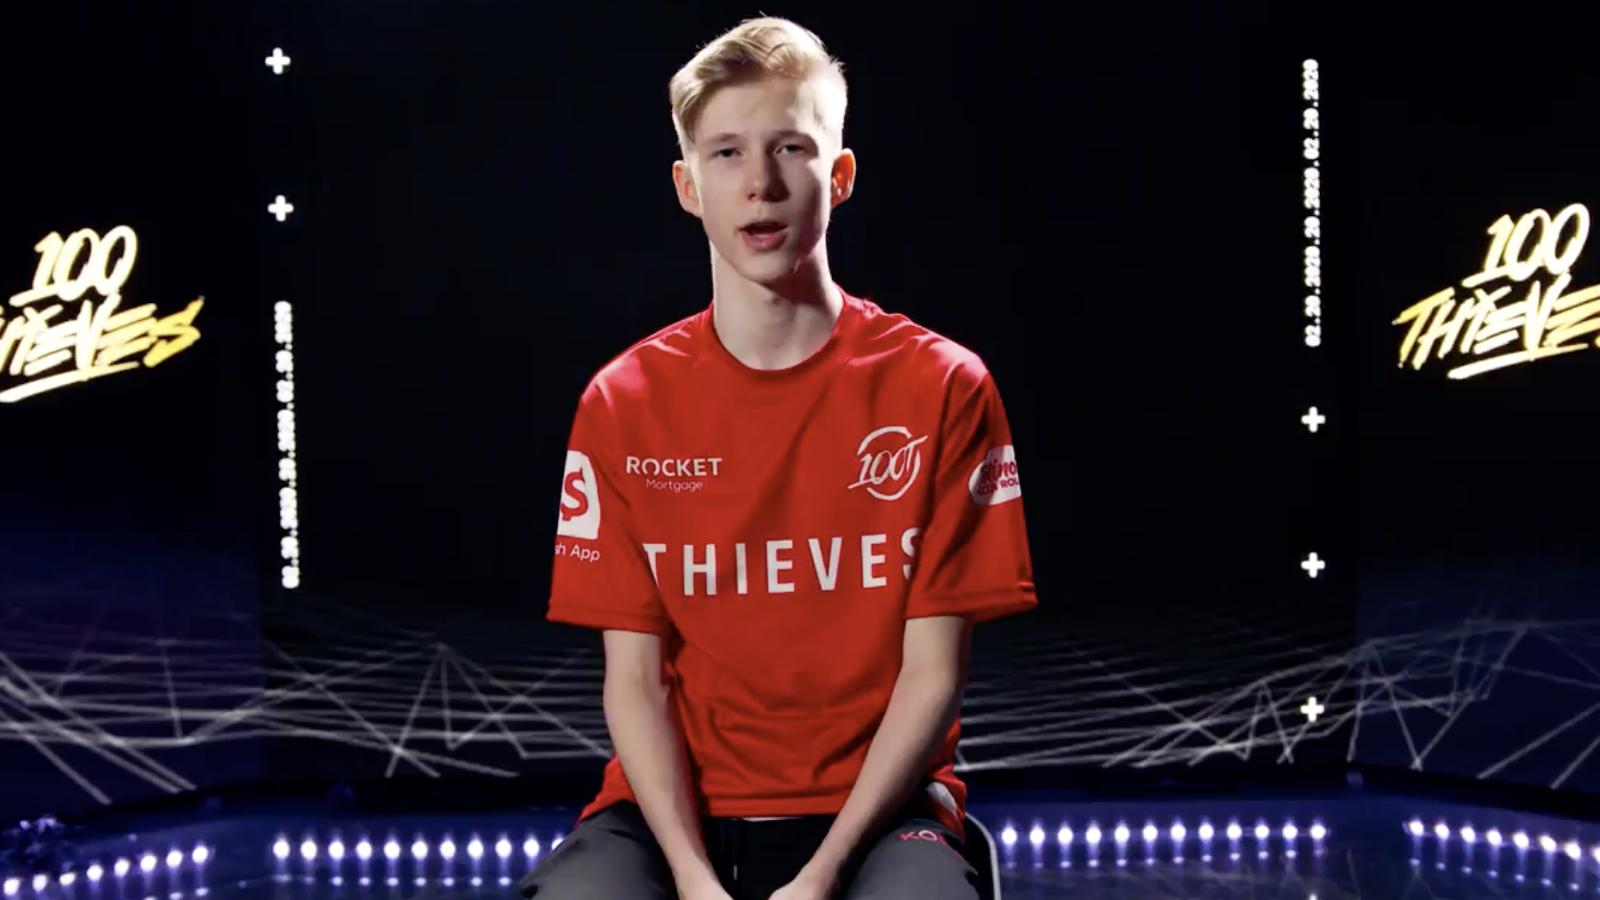 MrSavage in a red 100 Thieves top sitting in a chair